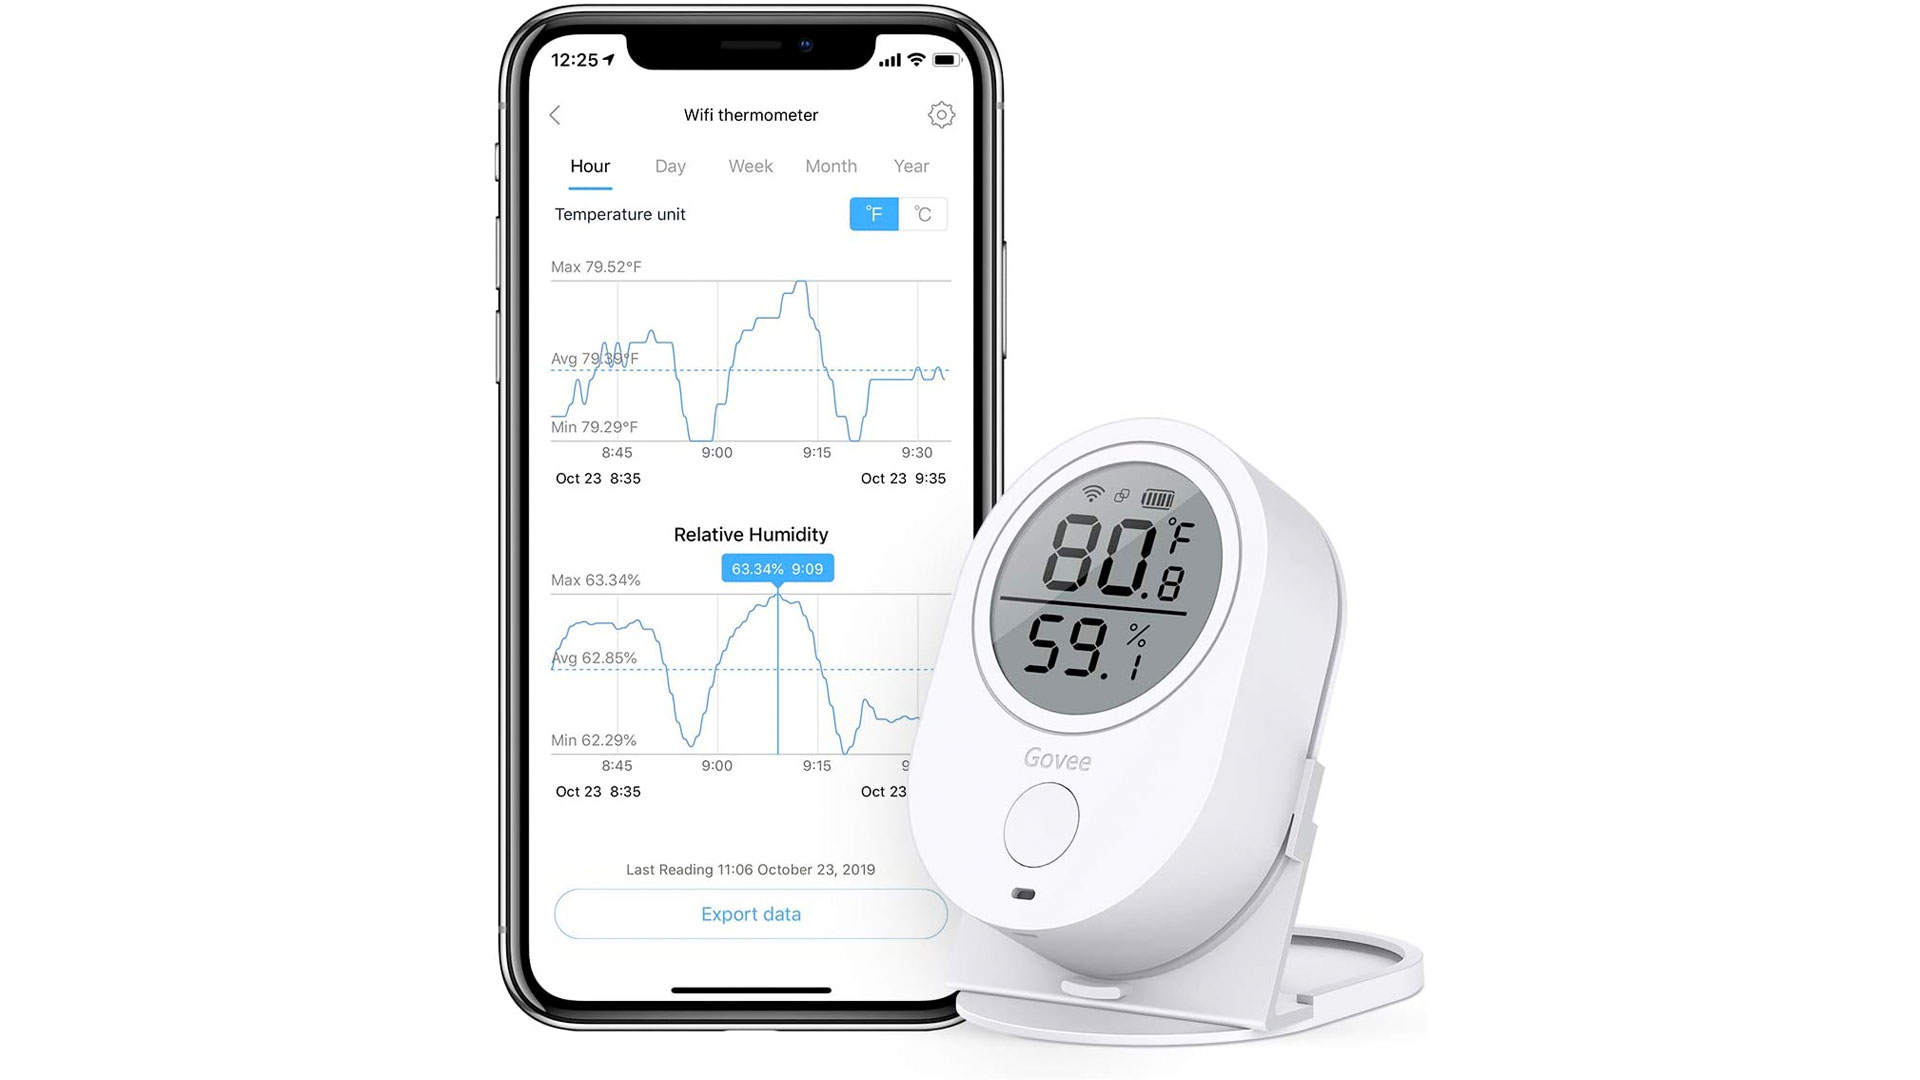 Govee's Wi-Fi and Bluetooth smart thermometer/hygrometers start at